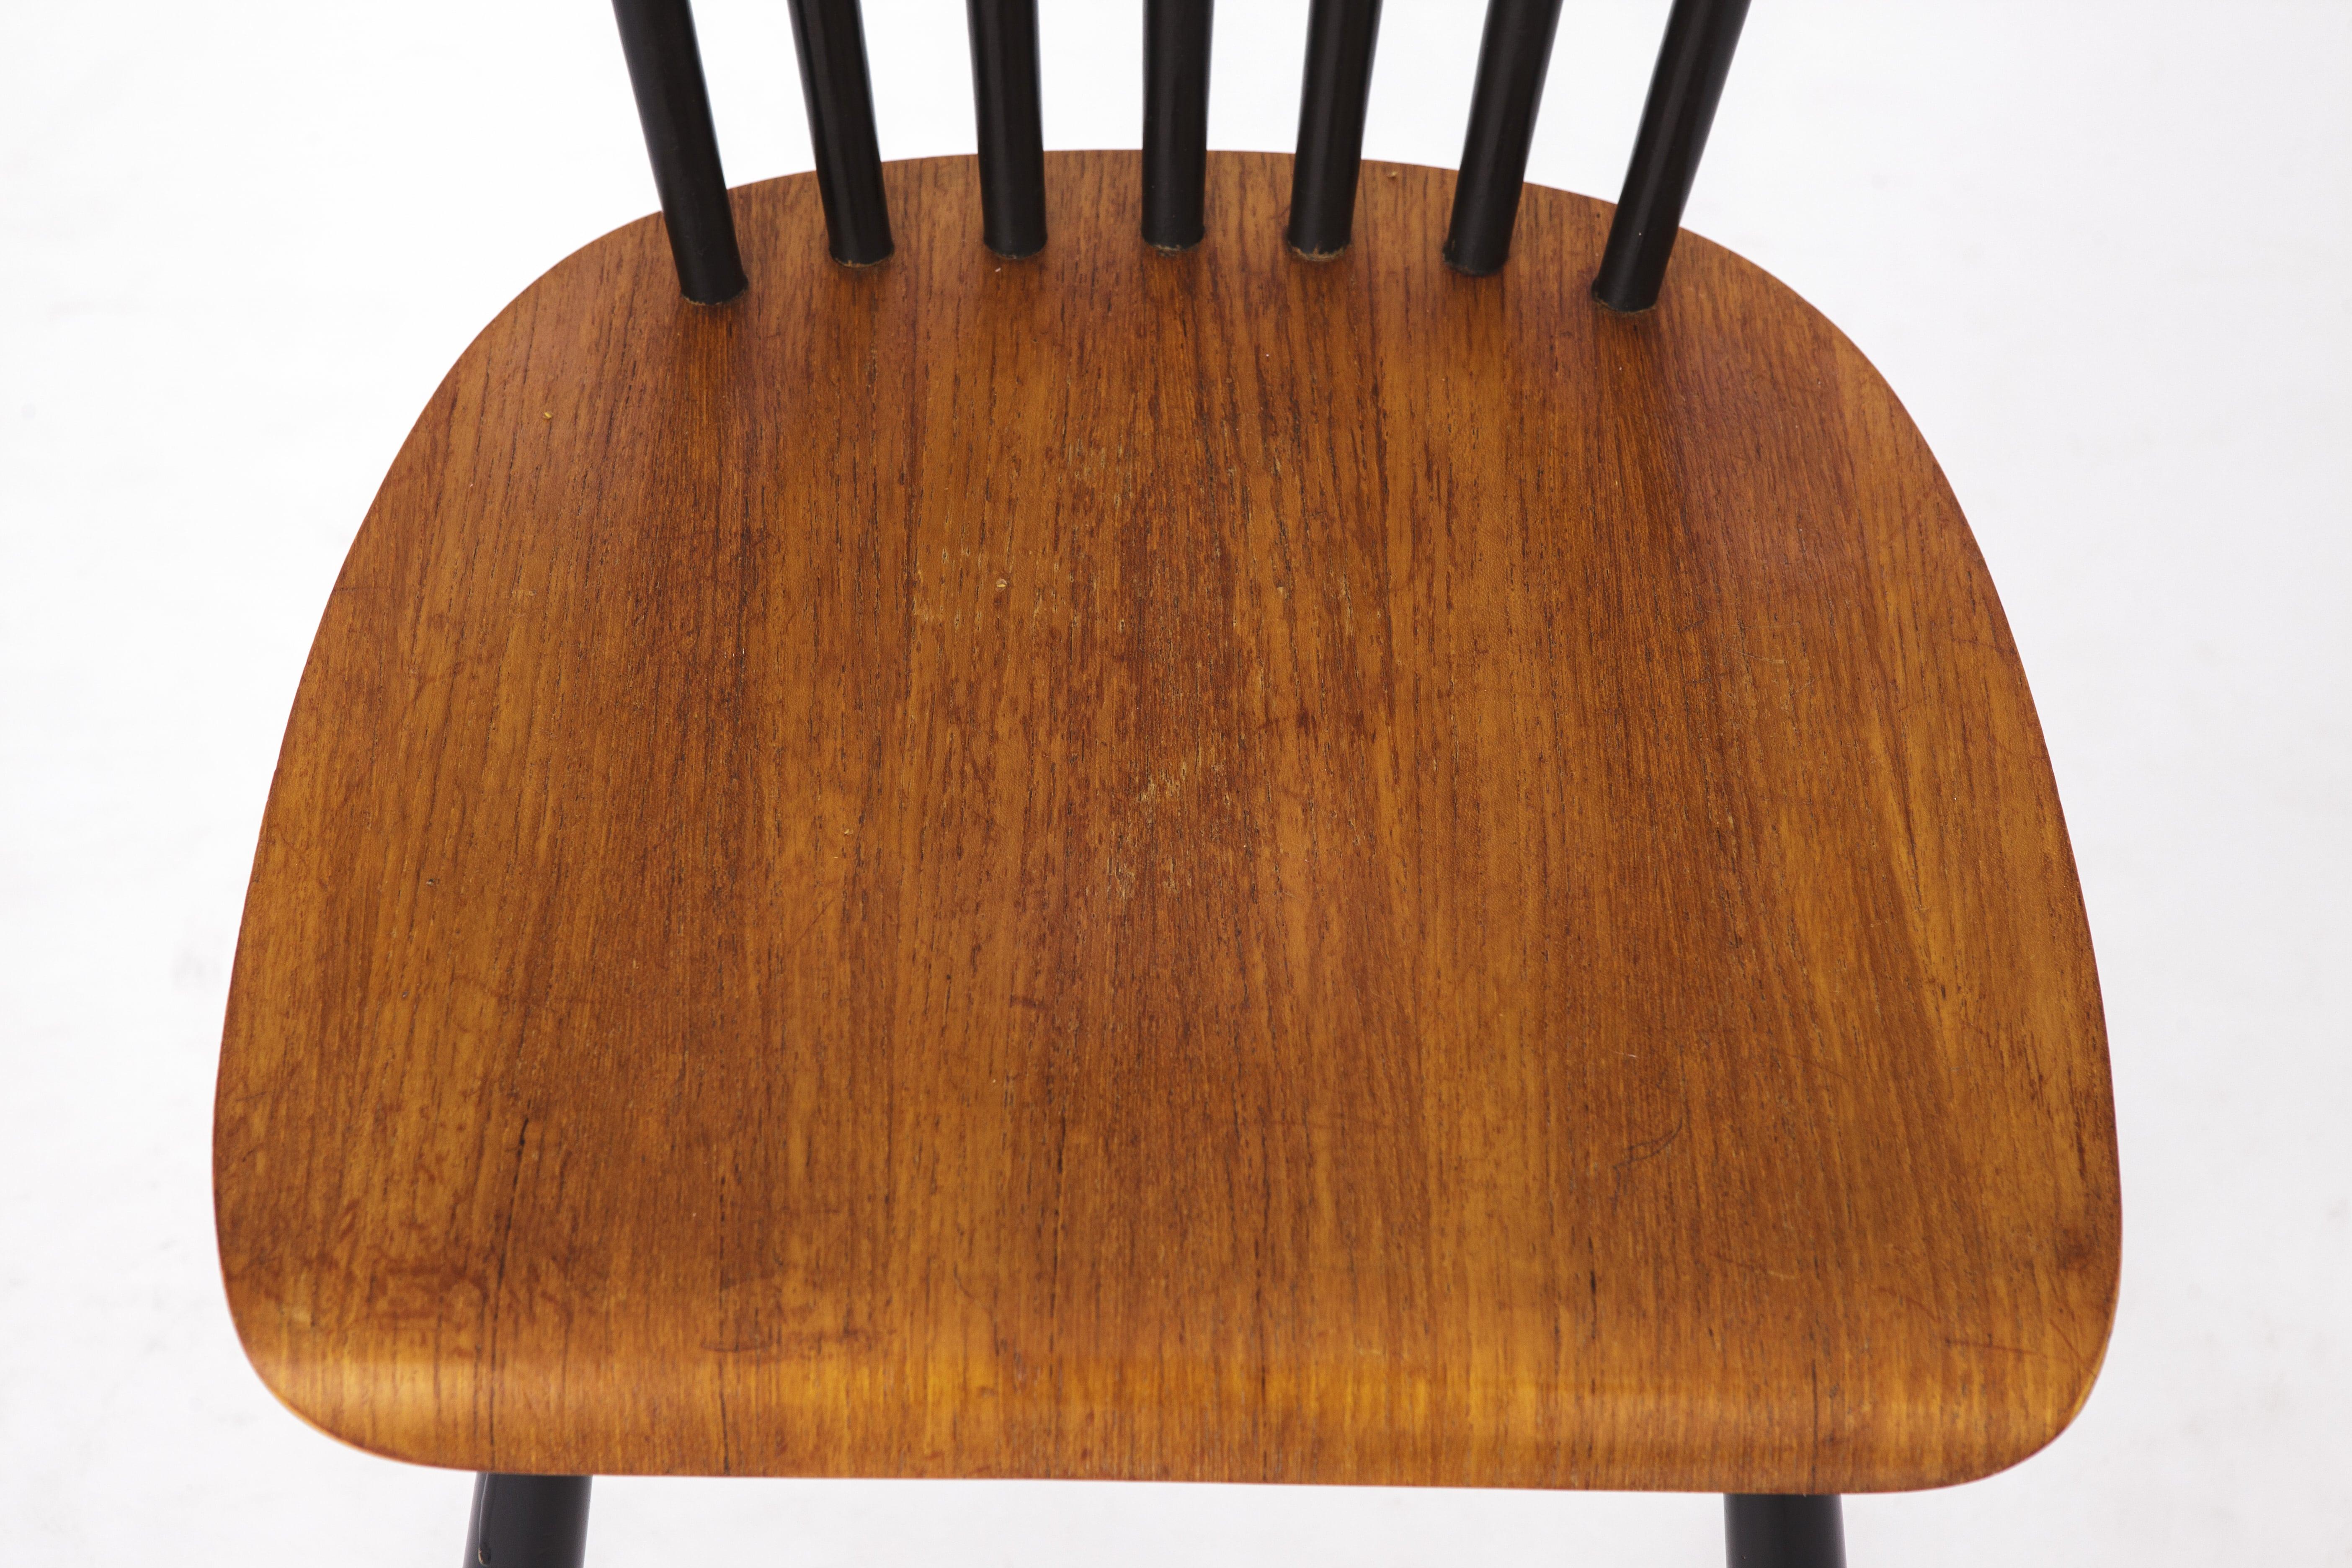 1 of 2 Vintage dining chairs 1960s - spindle back chair - Tapiovaara style In Good Condition For Sale In Hannover, DE